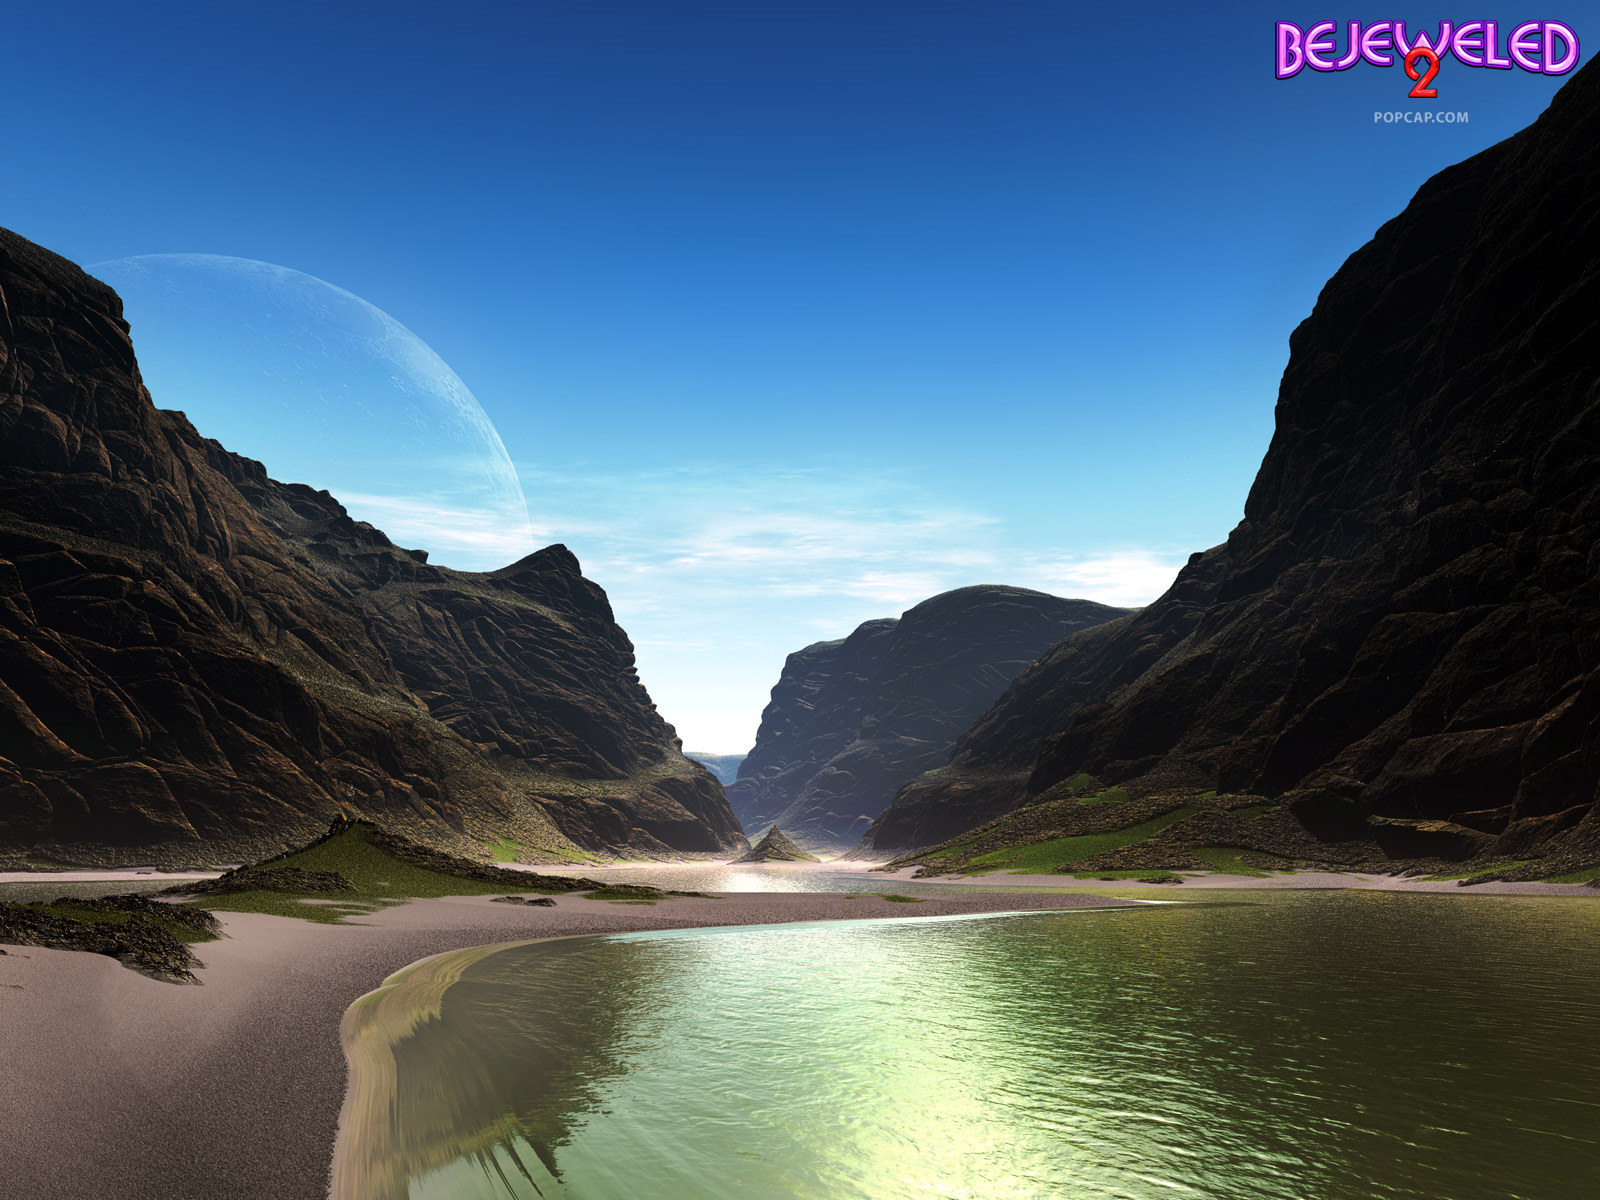 General 1600x1200 PopCap Bejeweled Beyond Reality fantasy art digital art video games video game art water landscape reflection sky clouds planet title sand